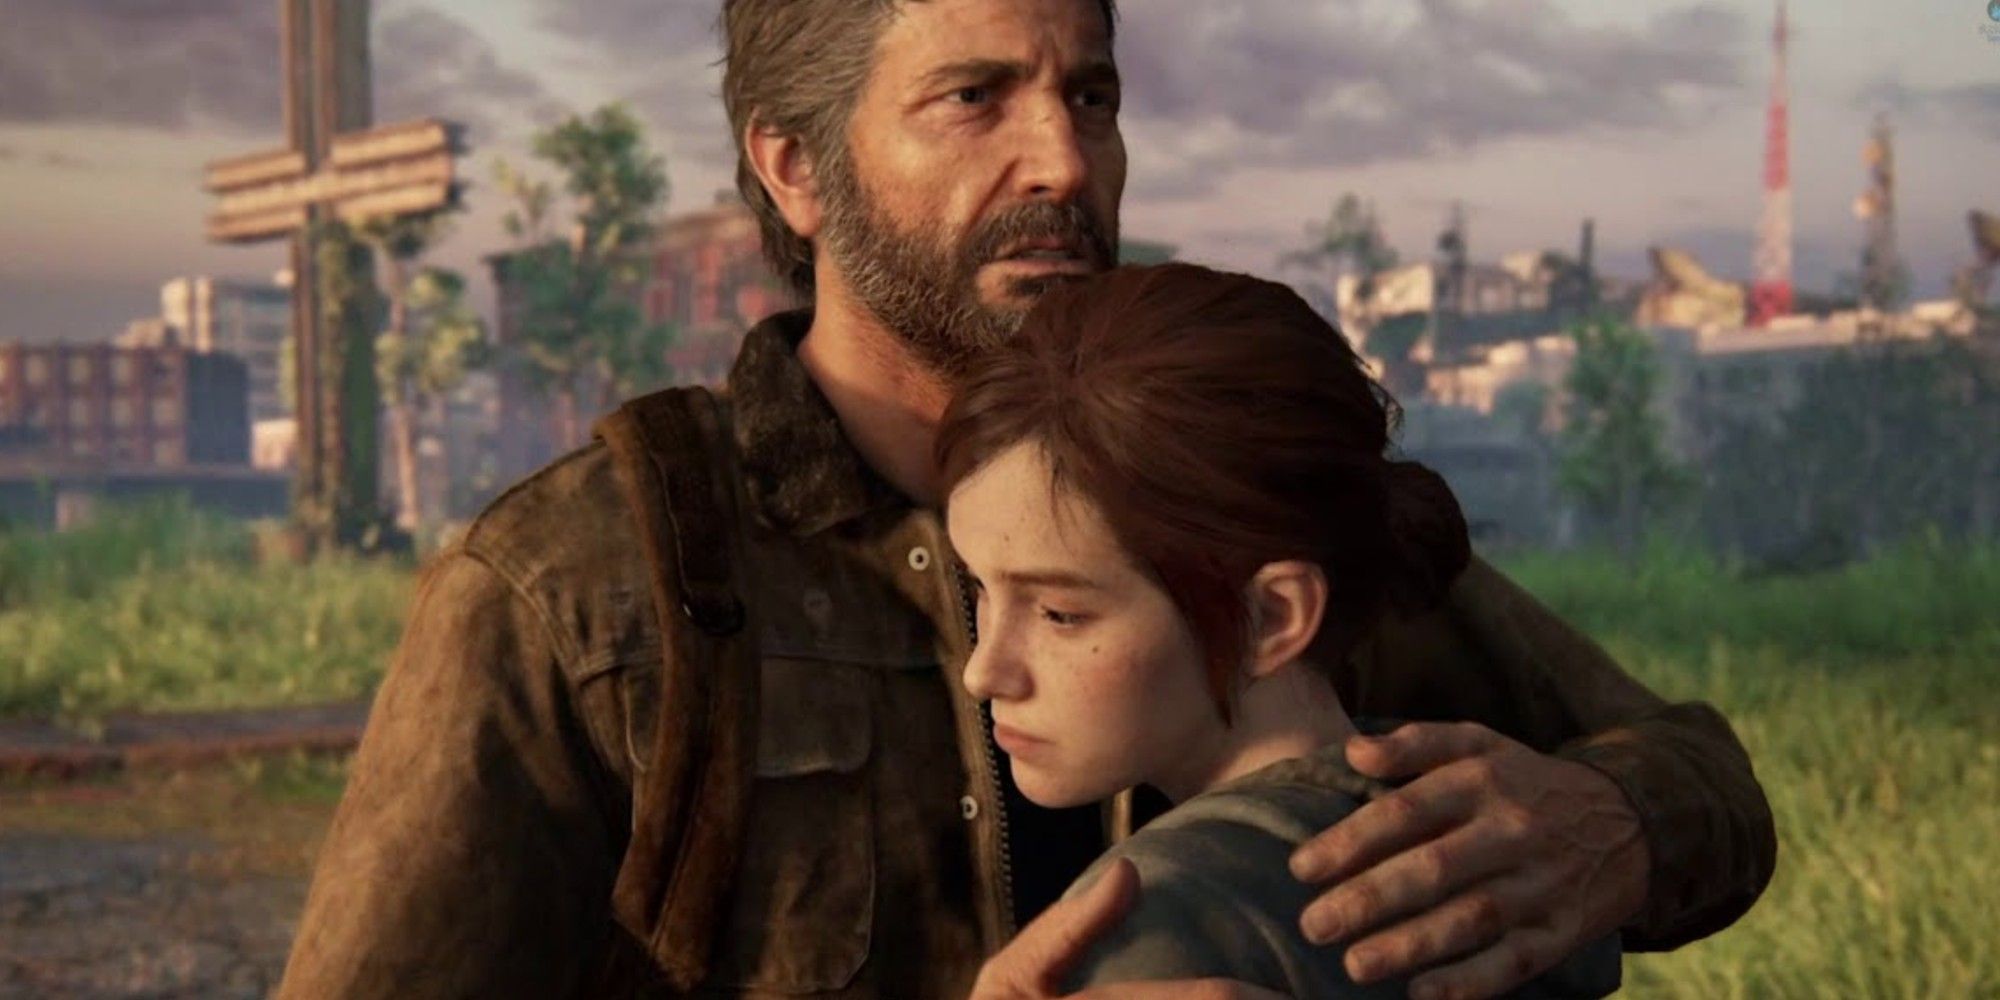 The Biggest Moments THE LAST OF US Series Adapts From the Games